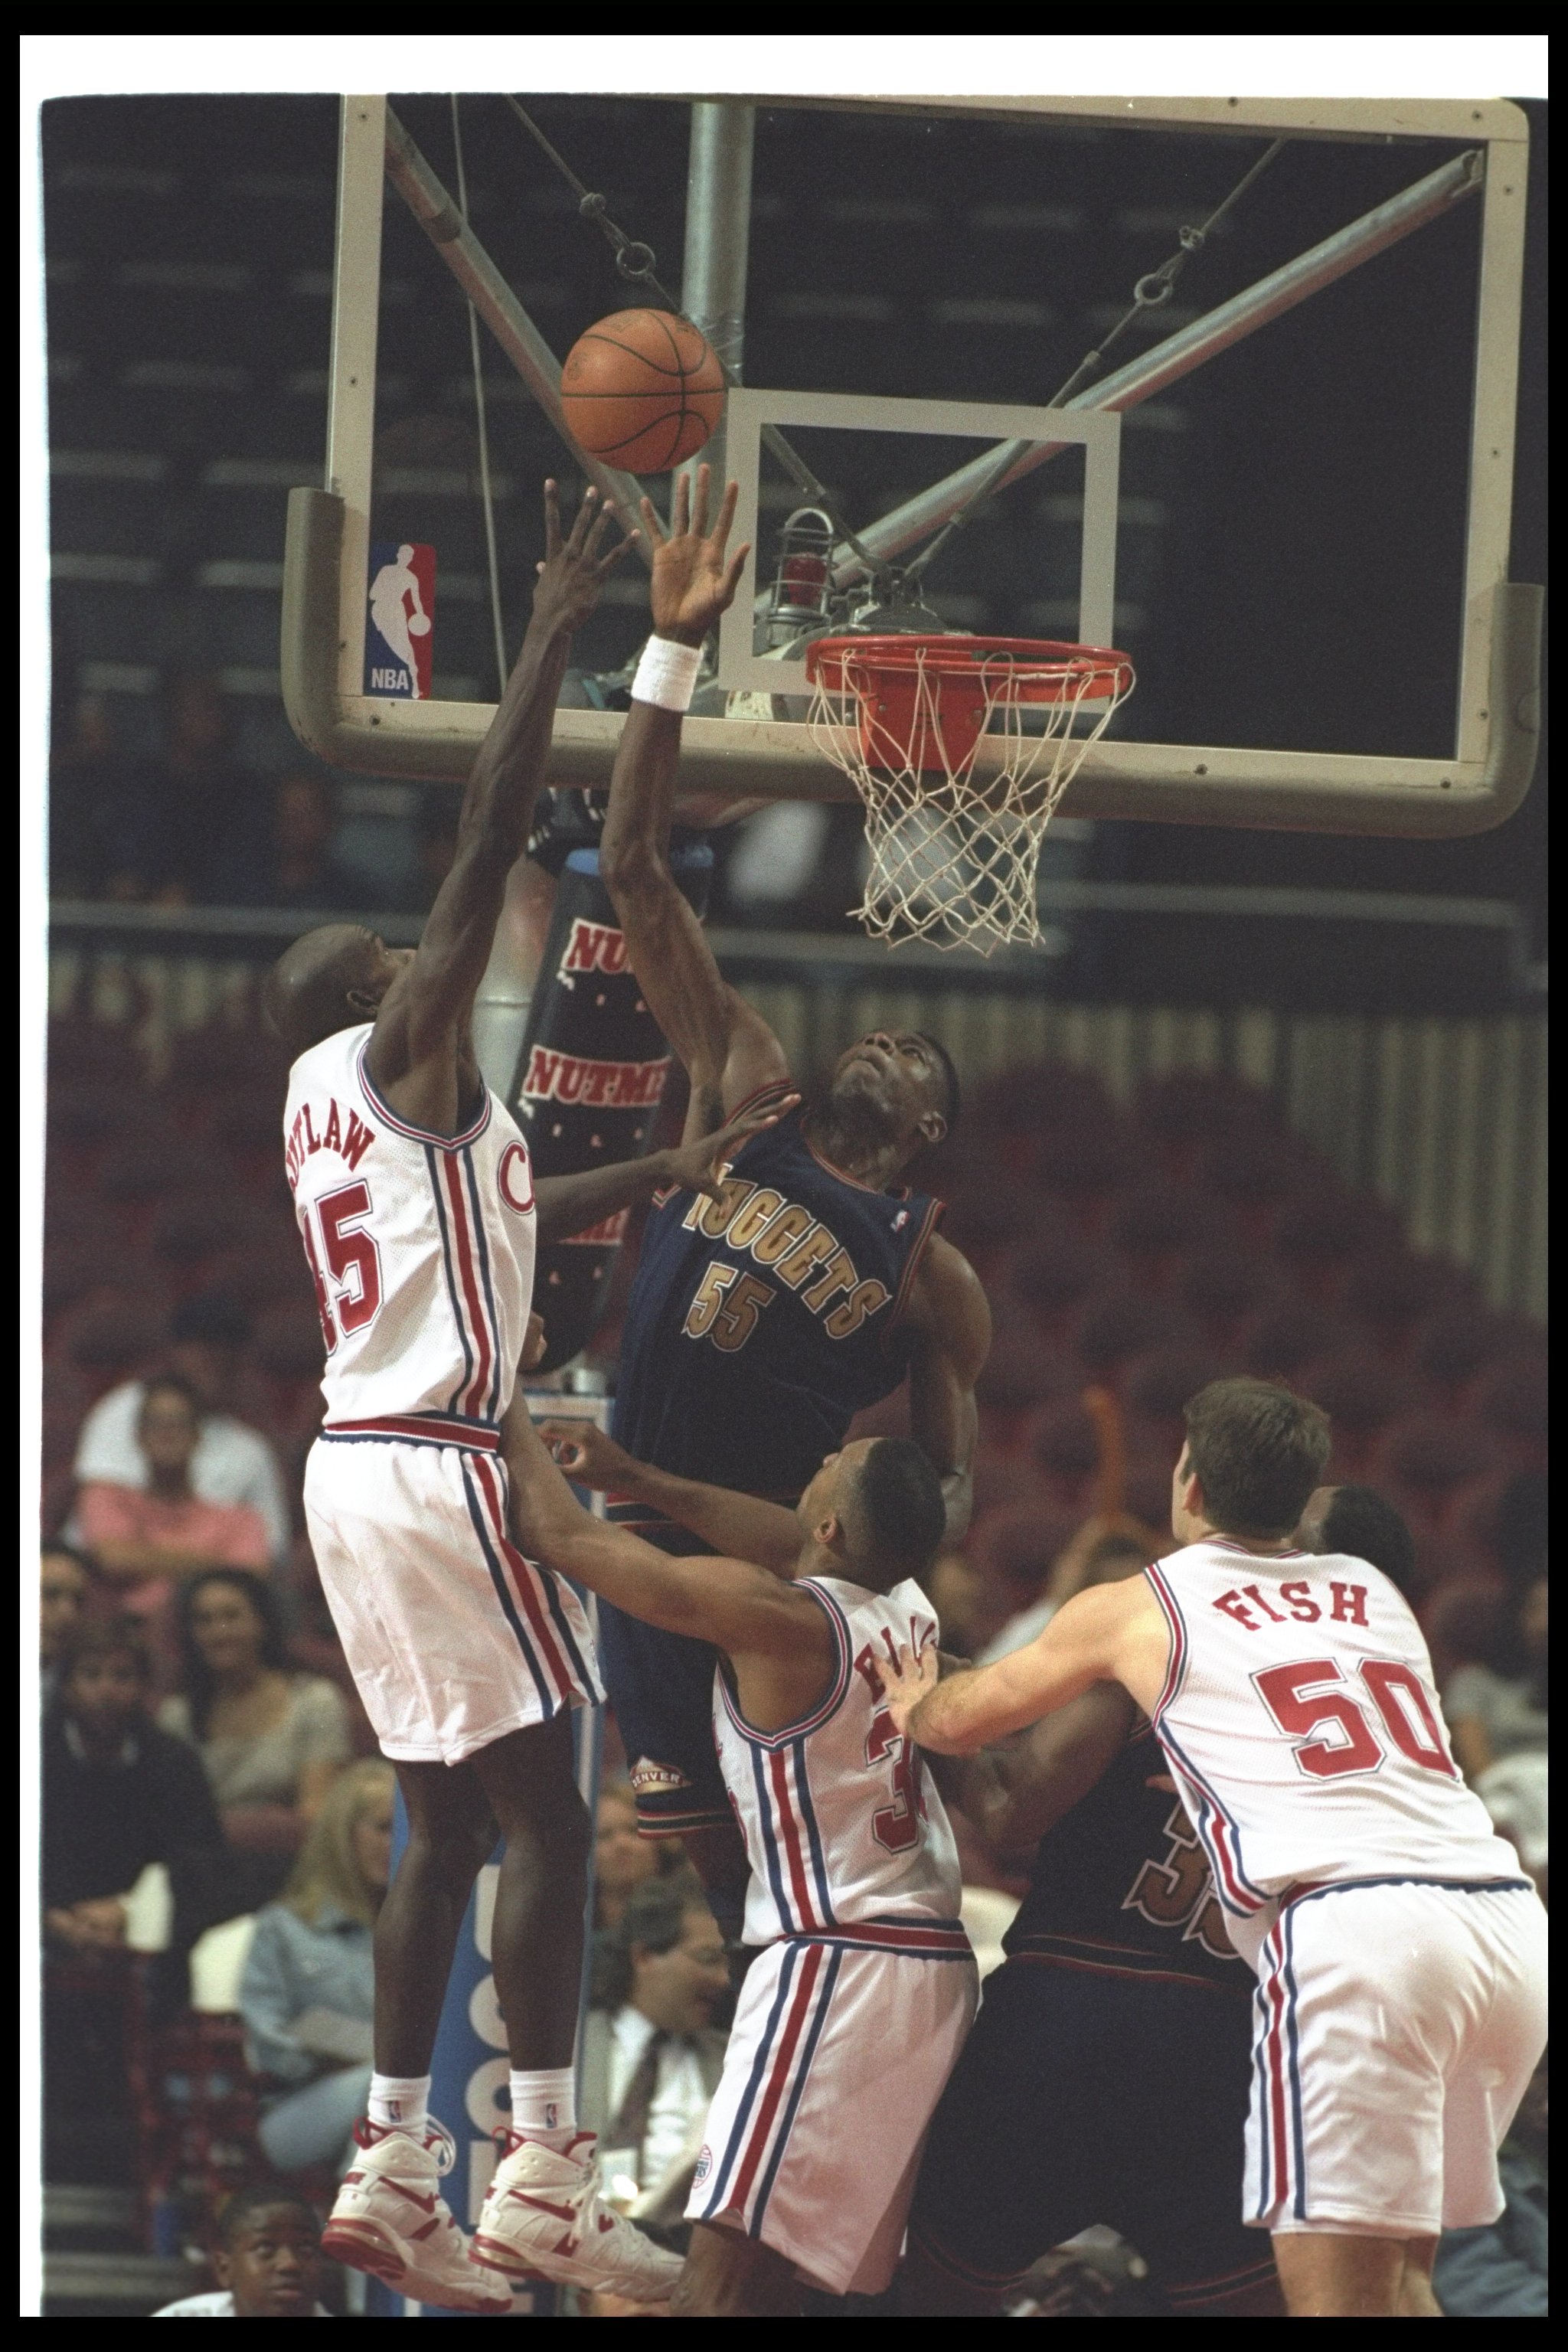 19 Oct 1994: Center Dikembe Mutombo of the Denver Nuggets goes up for the ball during a pre-season game against the Los Angeles Clippers at the Sports Arena in Los Angeles, California. The Nuggets won the game, 96-90.